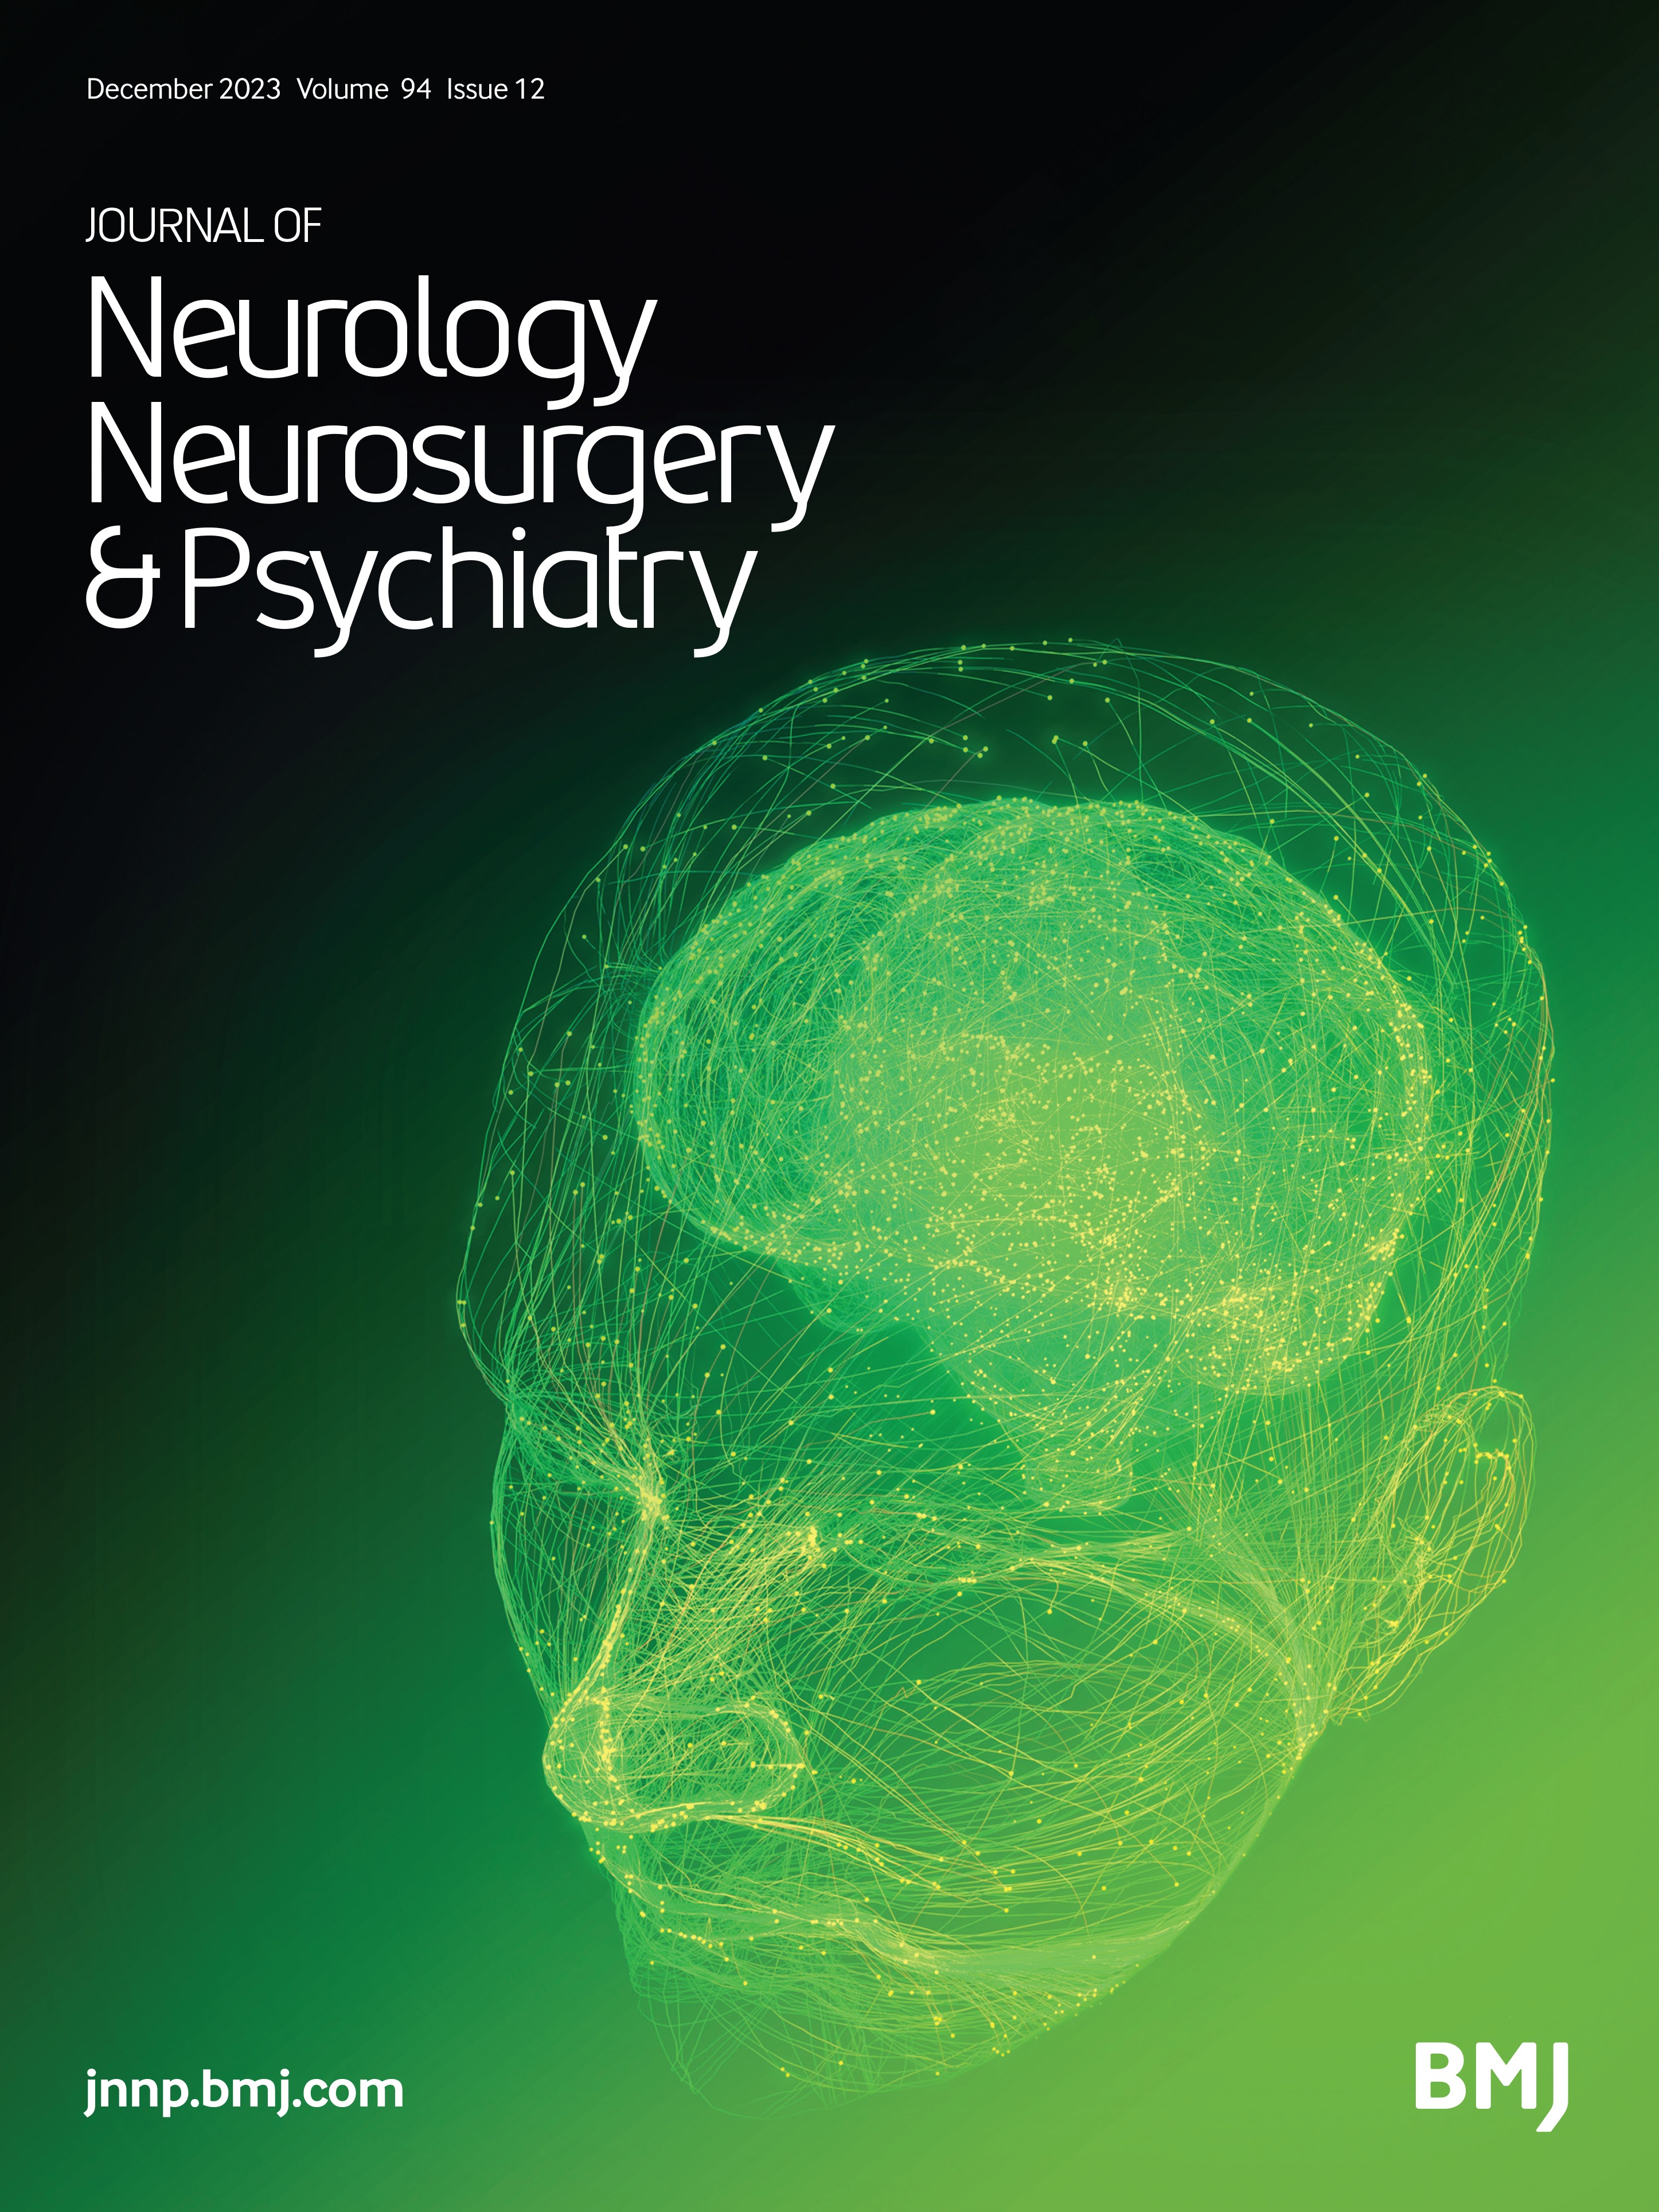 15 The clinical relevance of serum versus CSF NMDAR autoantibodies associated exclusively with psychiatric features: a systematic review and meta-analysis of individual patient data